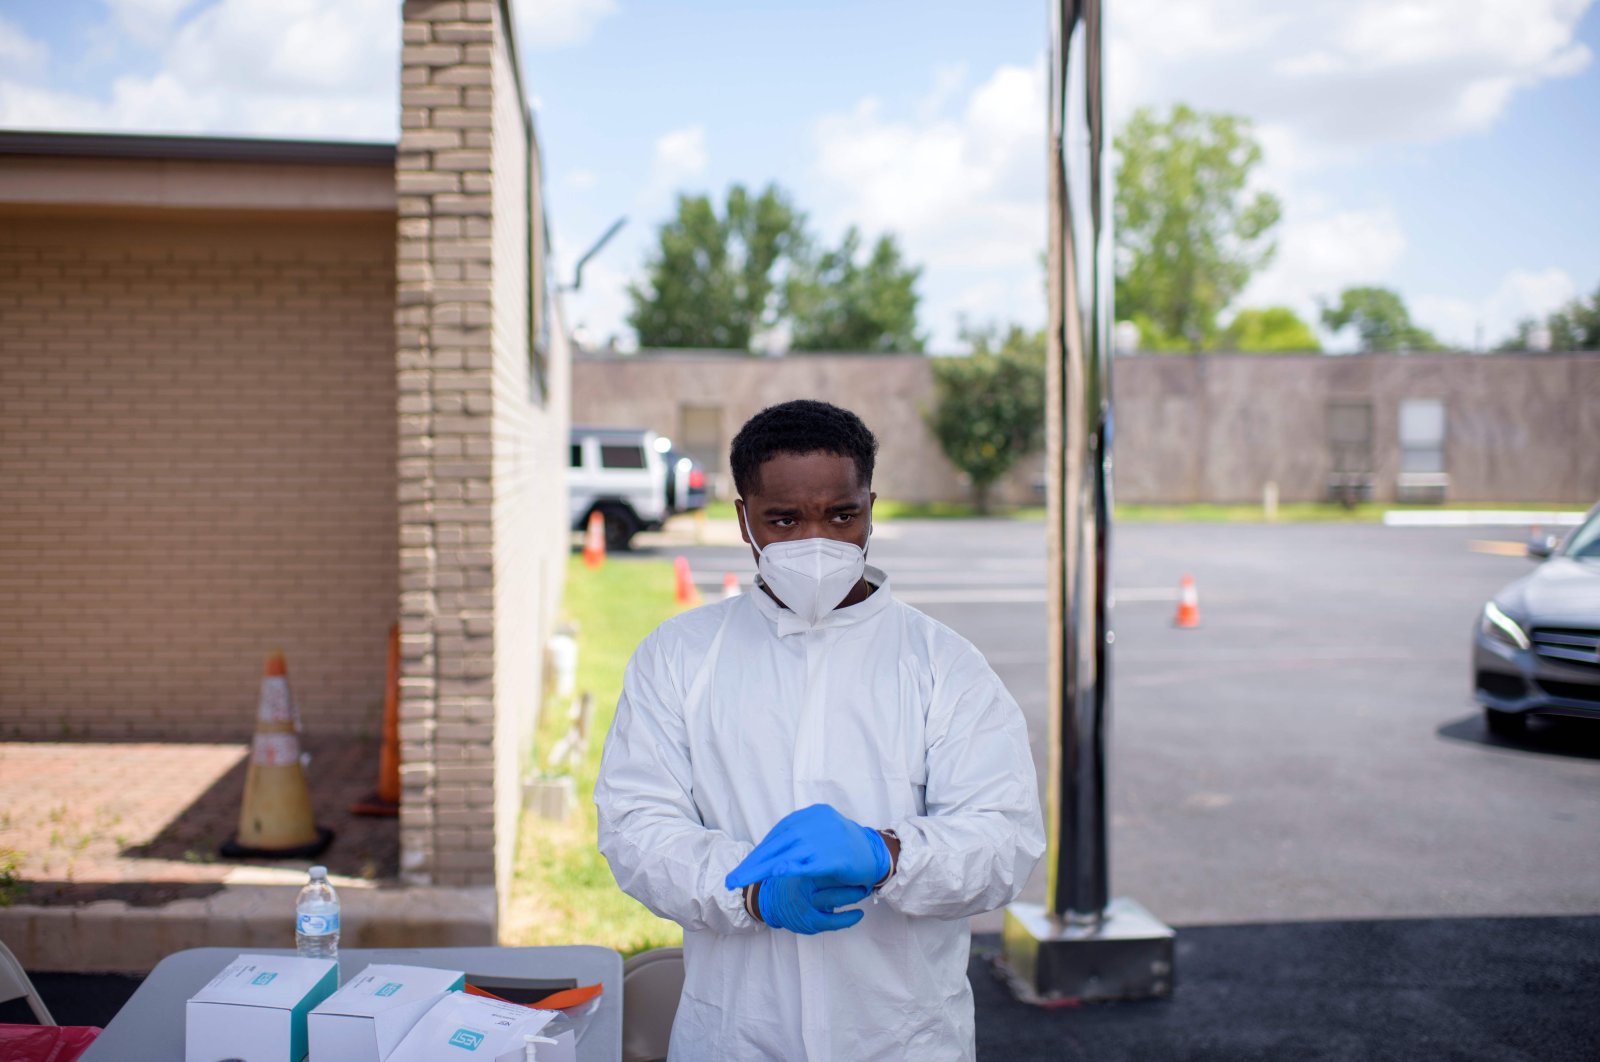 A healthcare worker puts on additional personal protective equipment at a COVID-19 testing site at United Memorial Medical Center in Houston, Texas, on July 9, 2020. (AFP Photo)